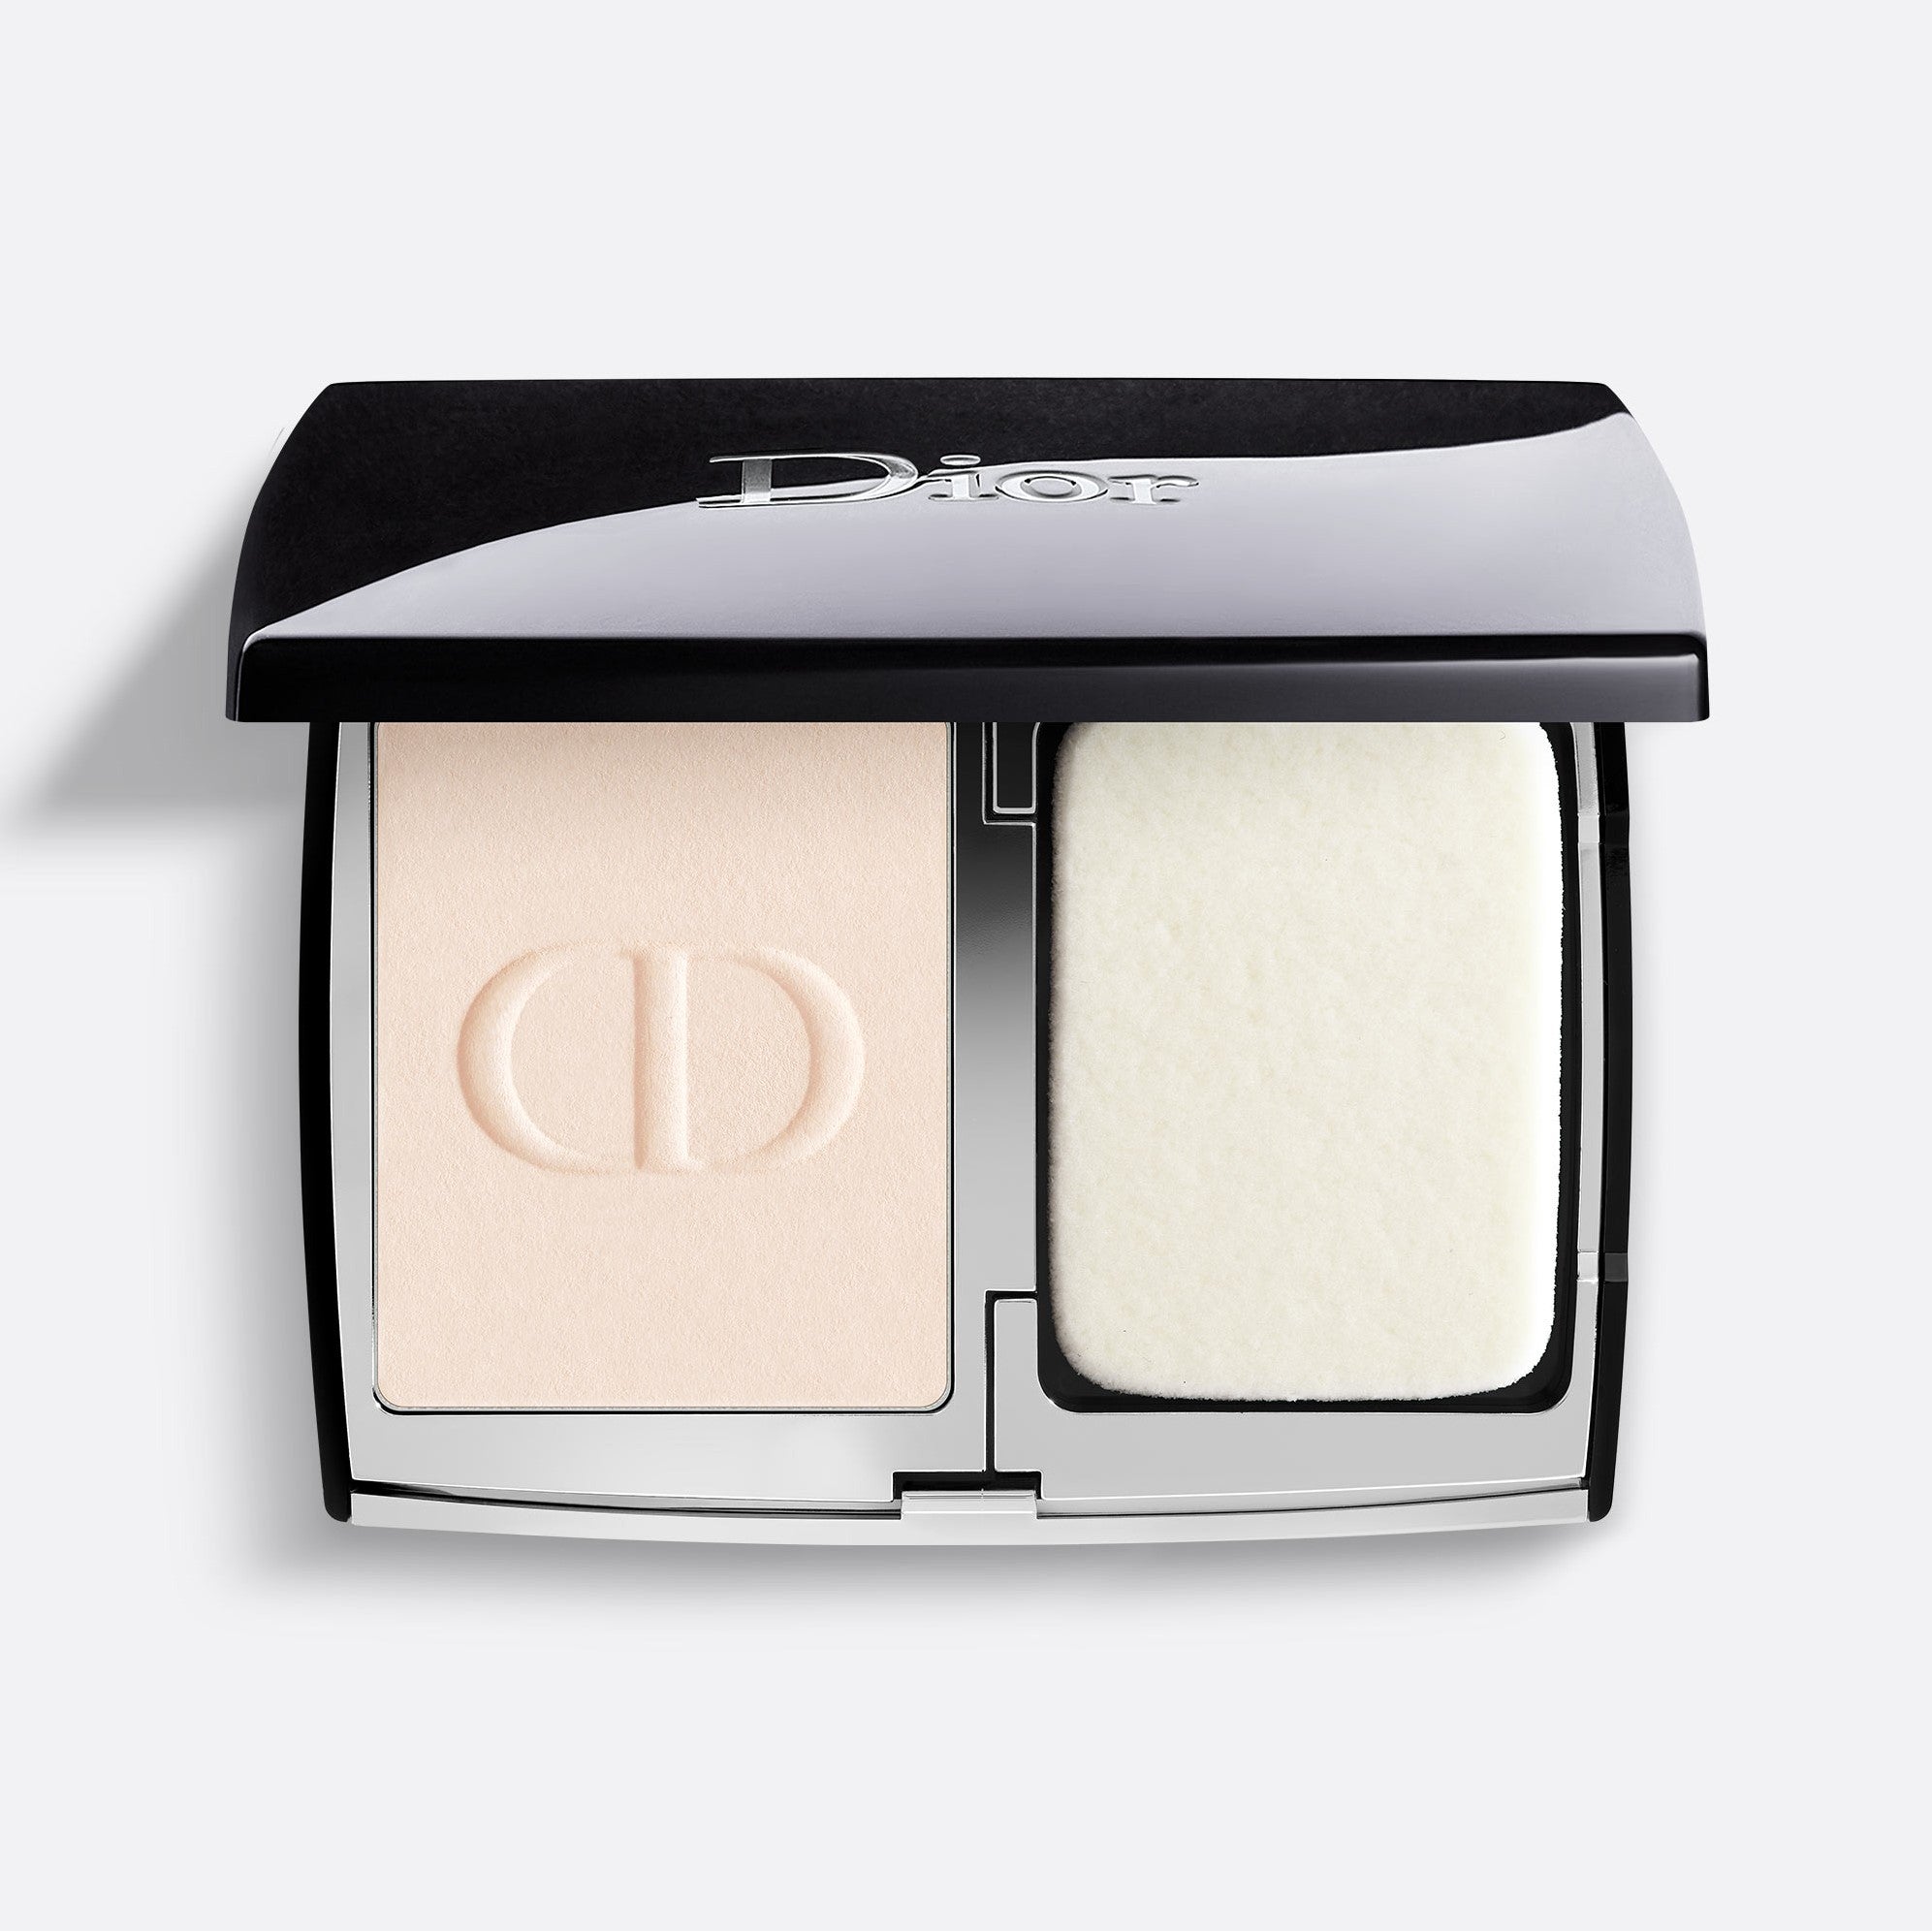 Dior Beauty Online Boutique Now Available in Malaysia  FISHMEATDIE